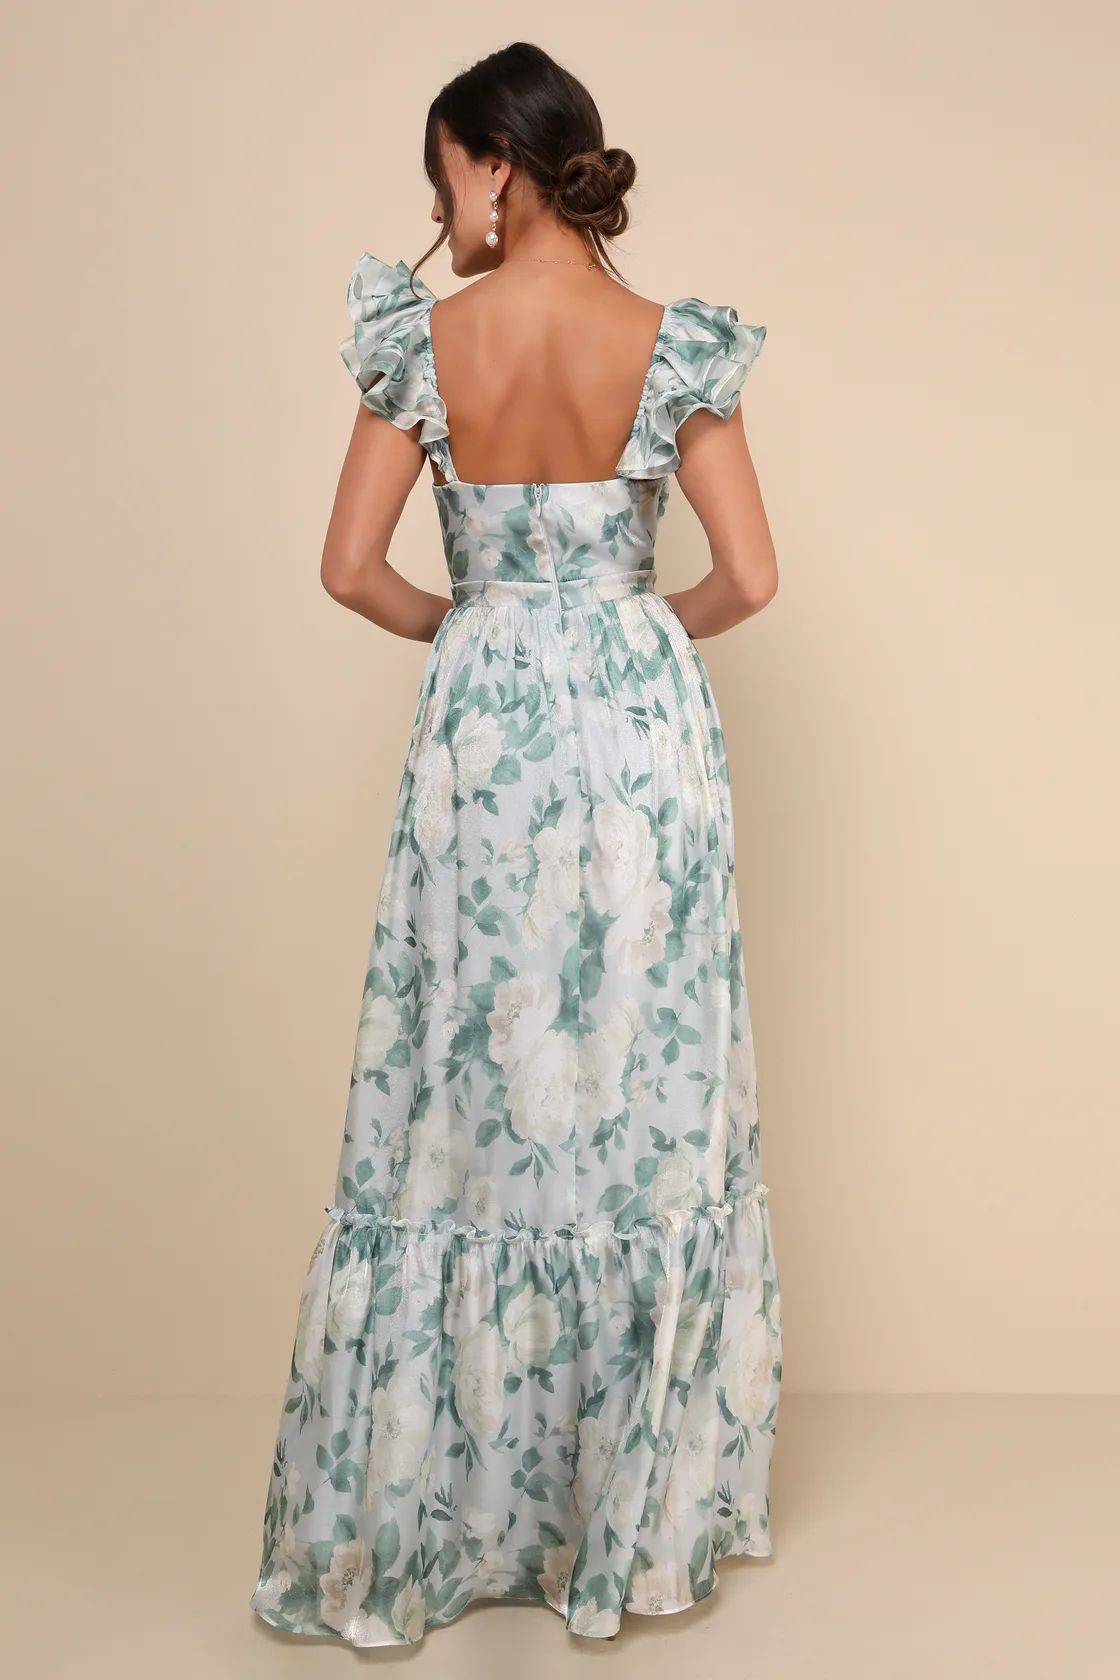 Soiree Perfection Light Blue Floral Ruffled Tiered Maxi Dress | Lulus